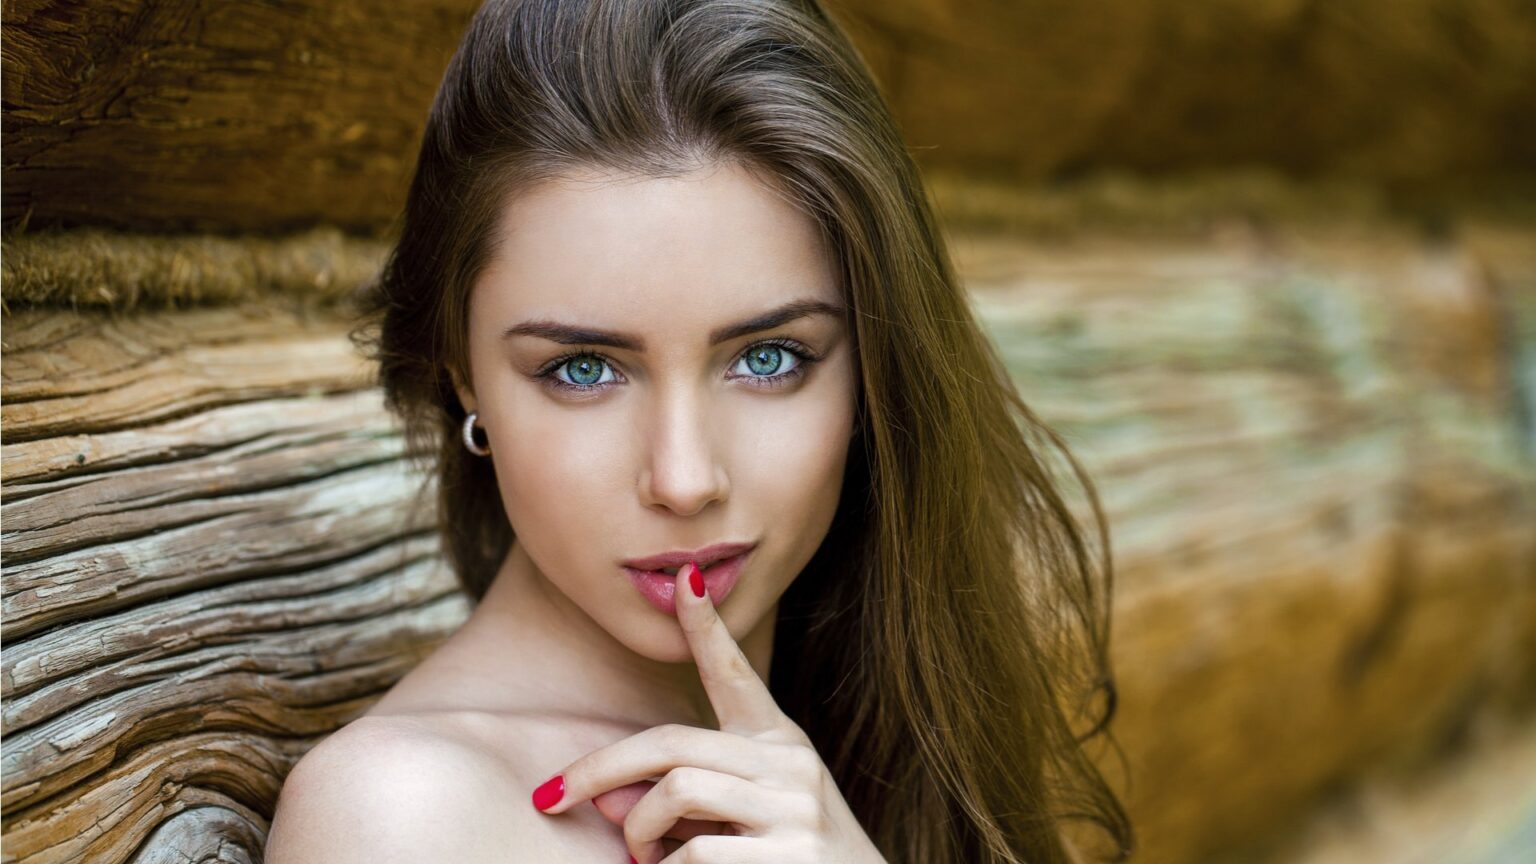 Here's how to meet a beautiful Ukrainian girl, and attract her attention and interest. Discover this selection of relevant ways of dating online.